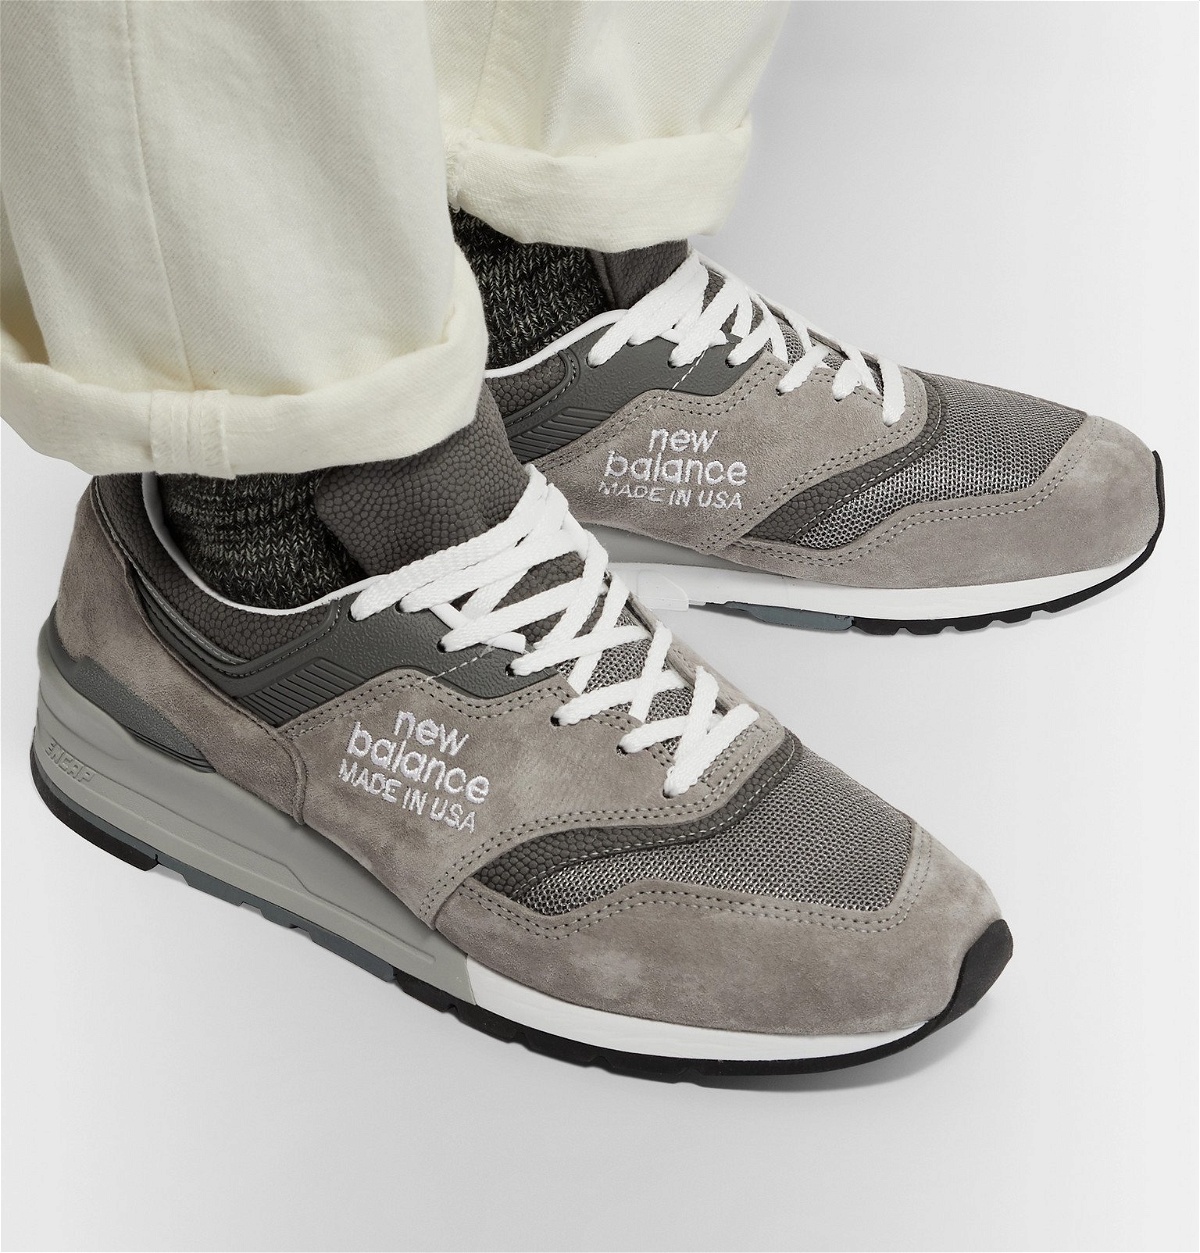 New Balance - M997 Suede, Leather and Mesh Sneakers - Gray New Balance